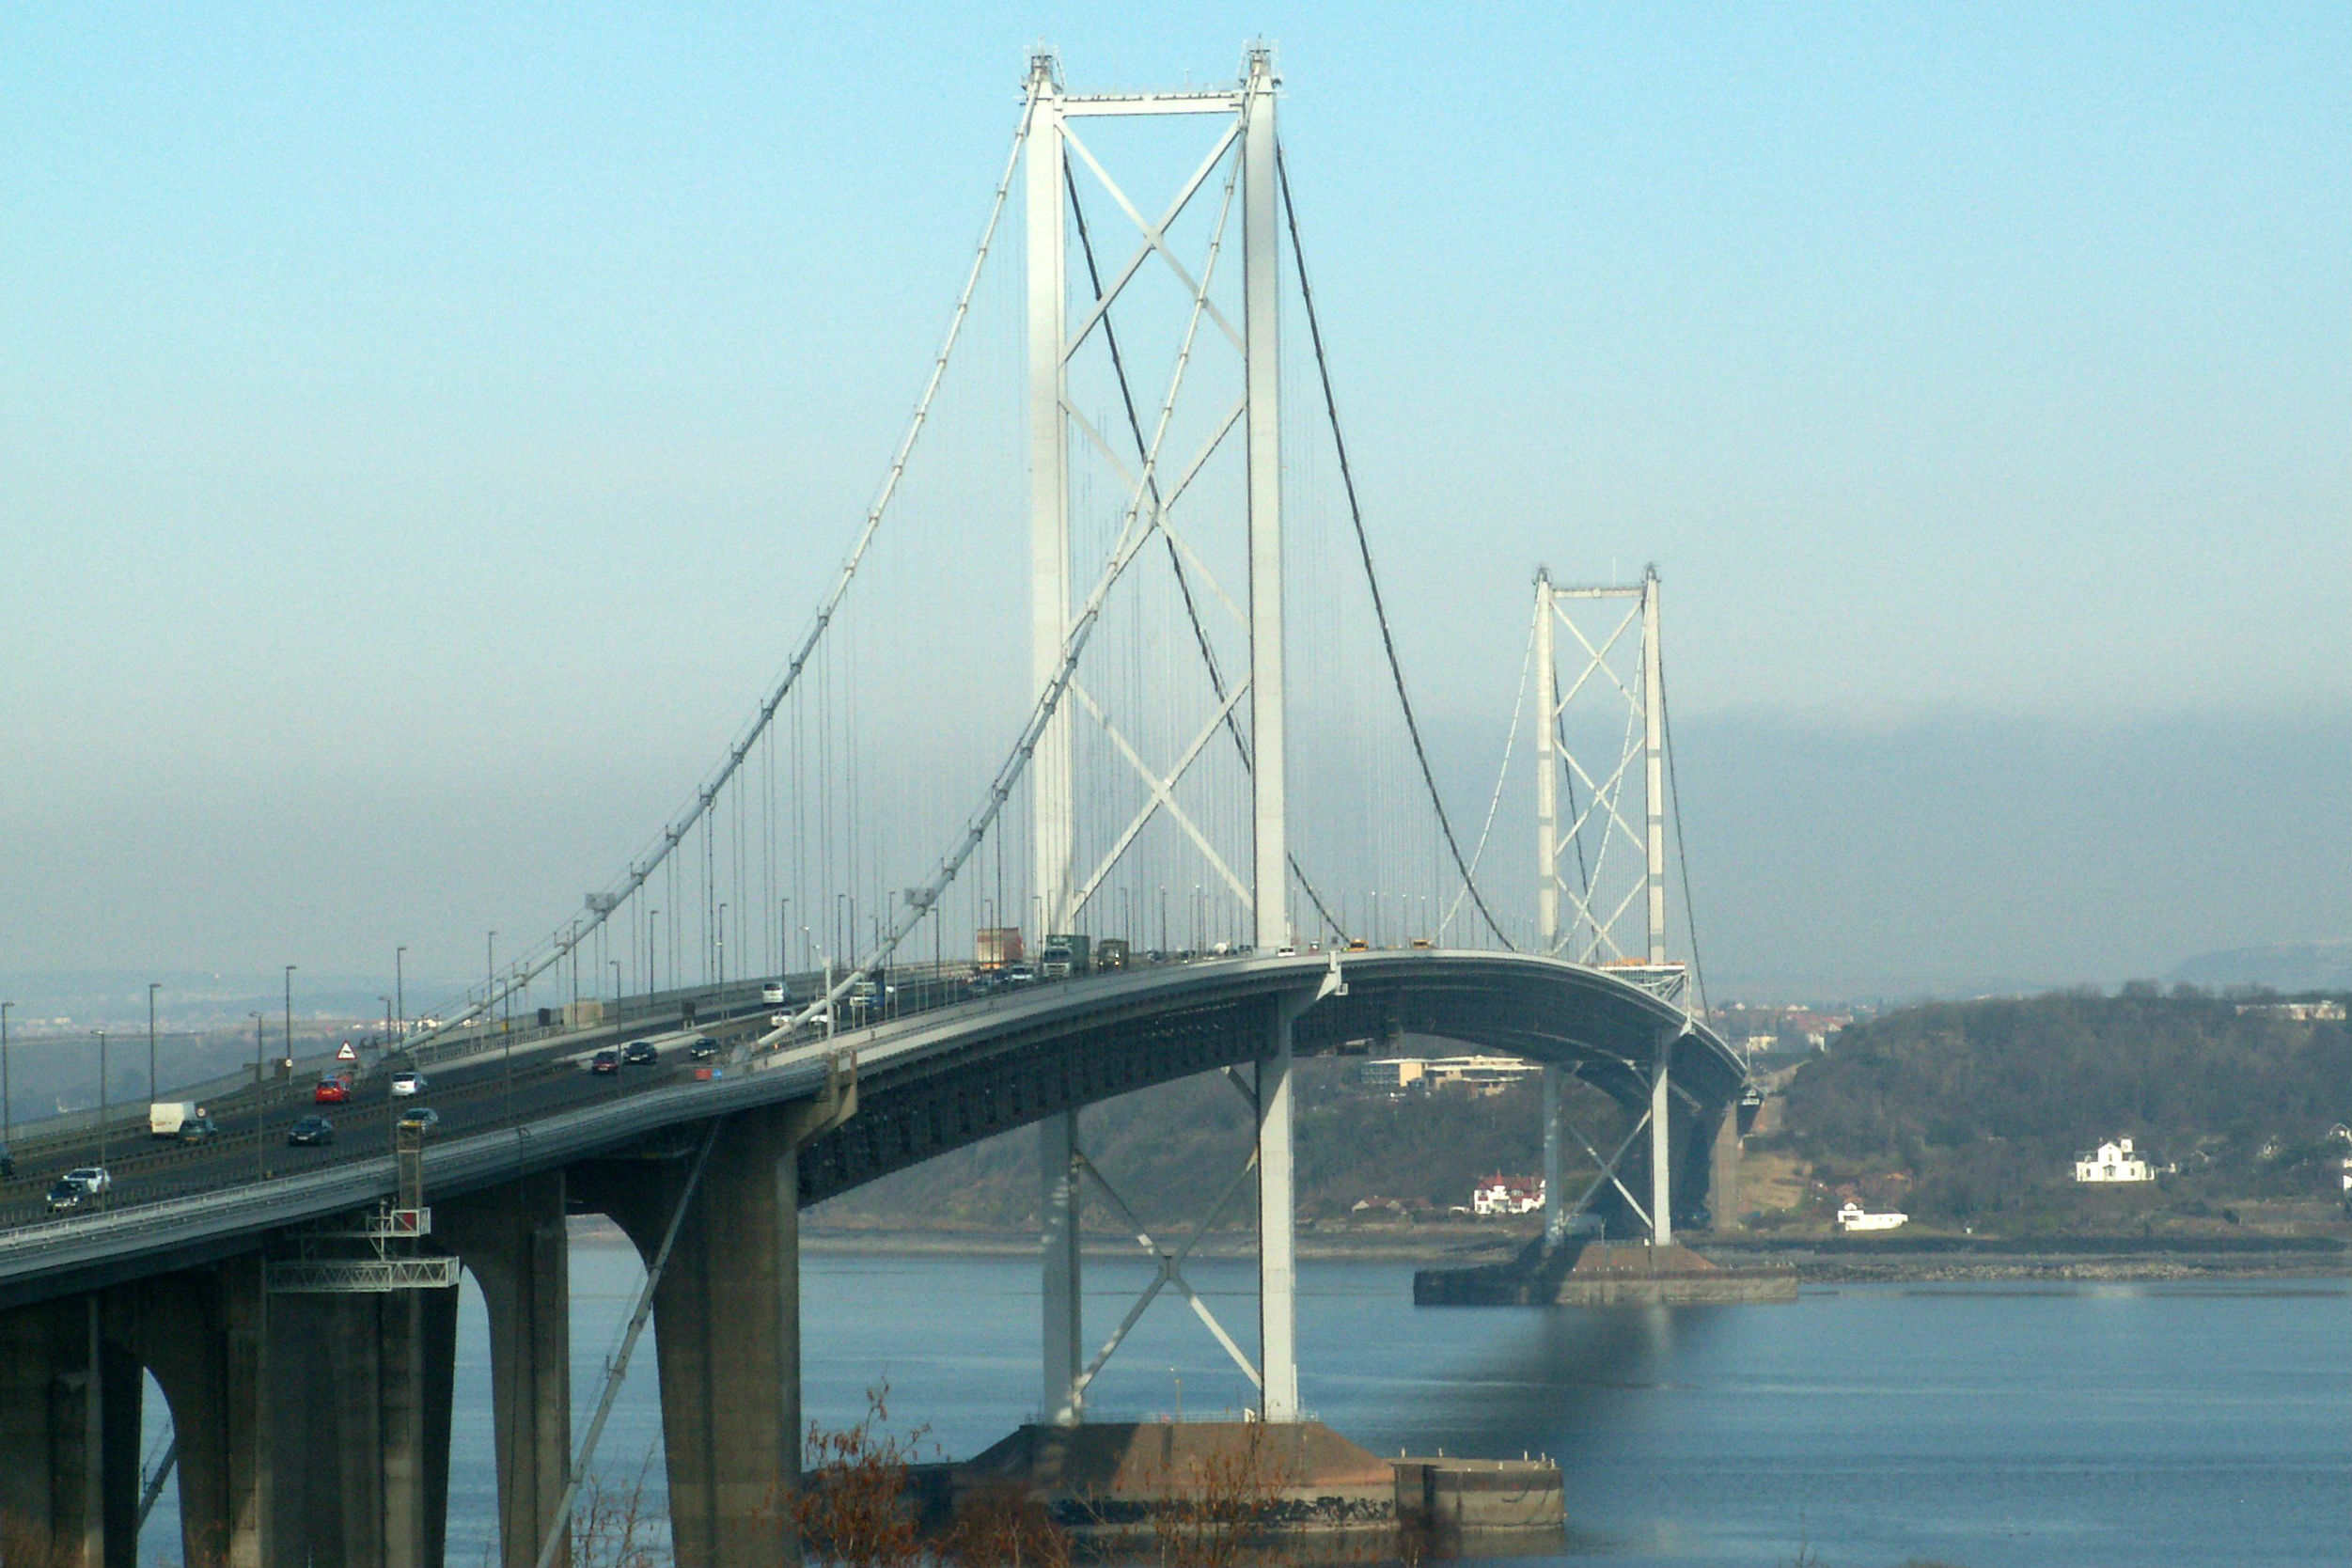 Learner riders face ban from two major bridges and 23-mile detour